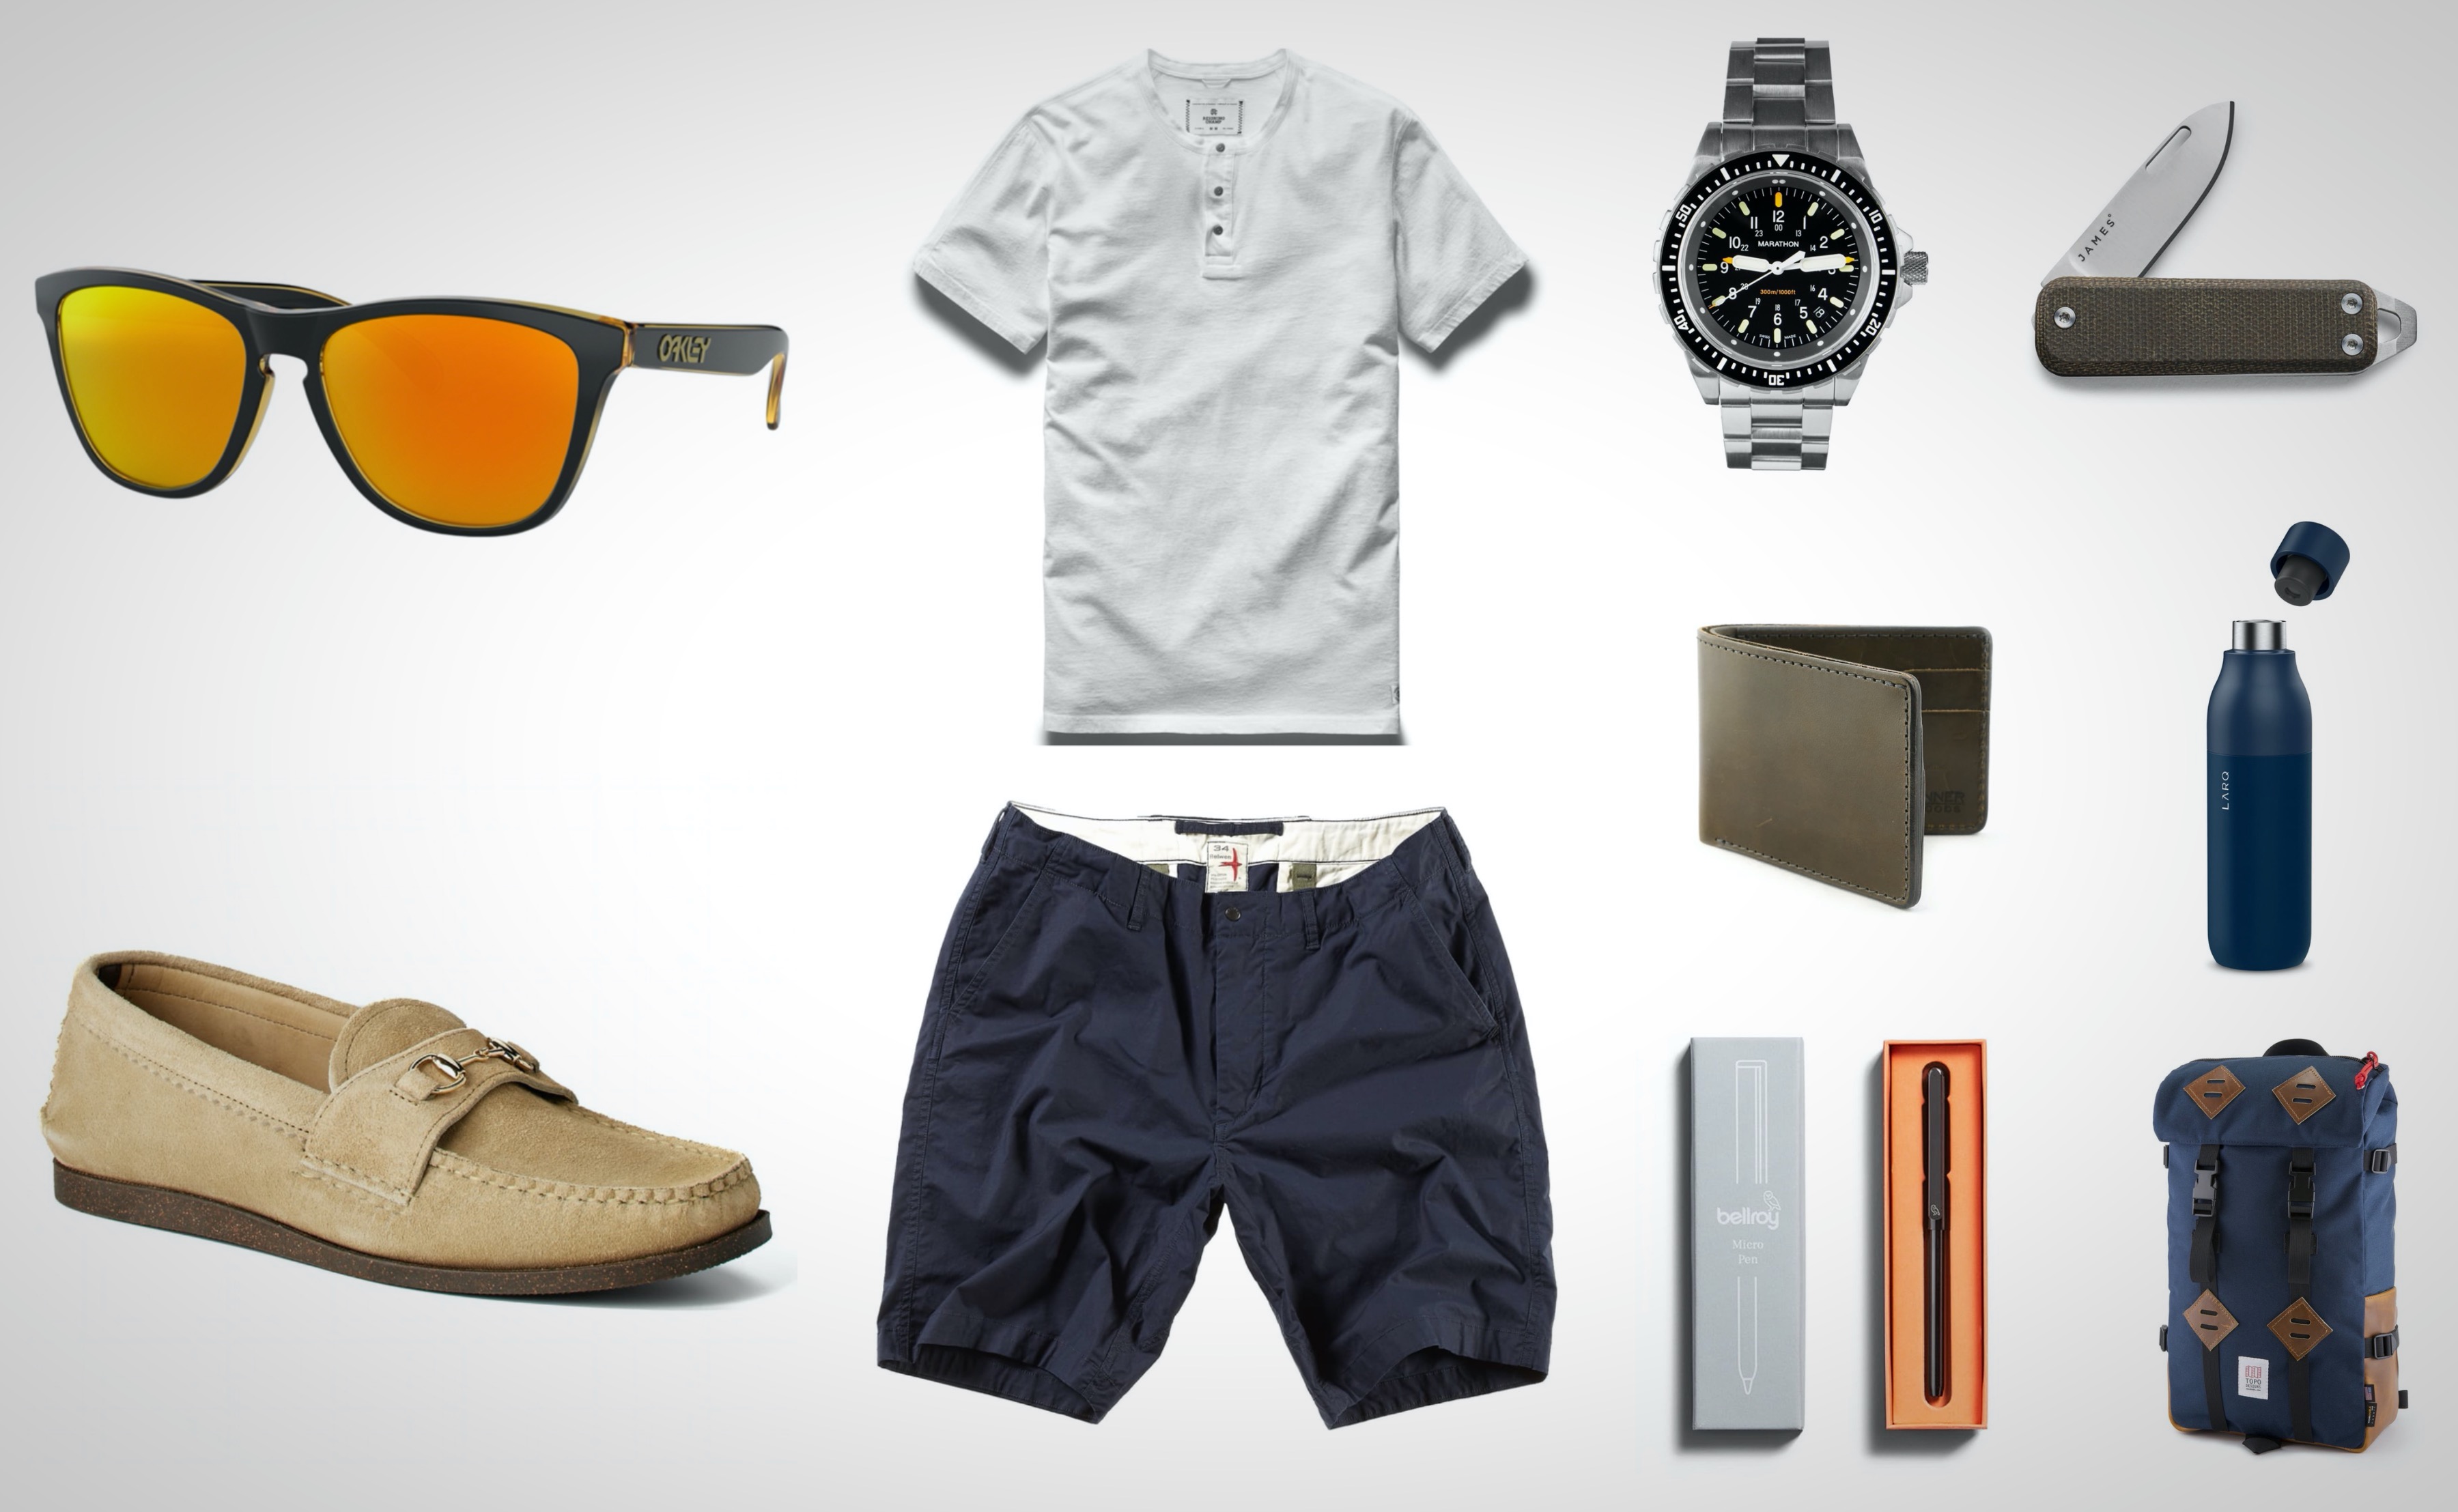 Essential Everyday Carry Items That Every Guy Should Own